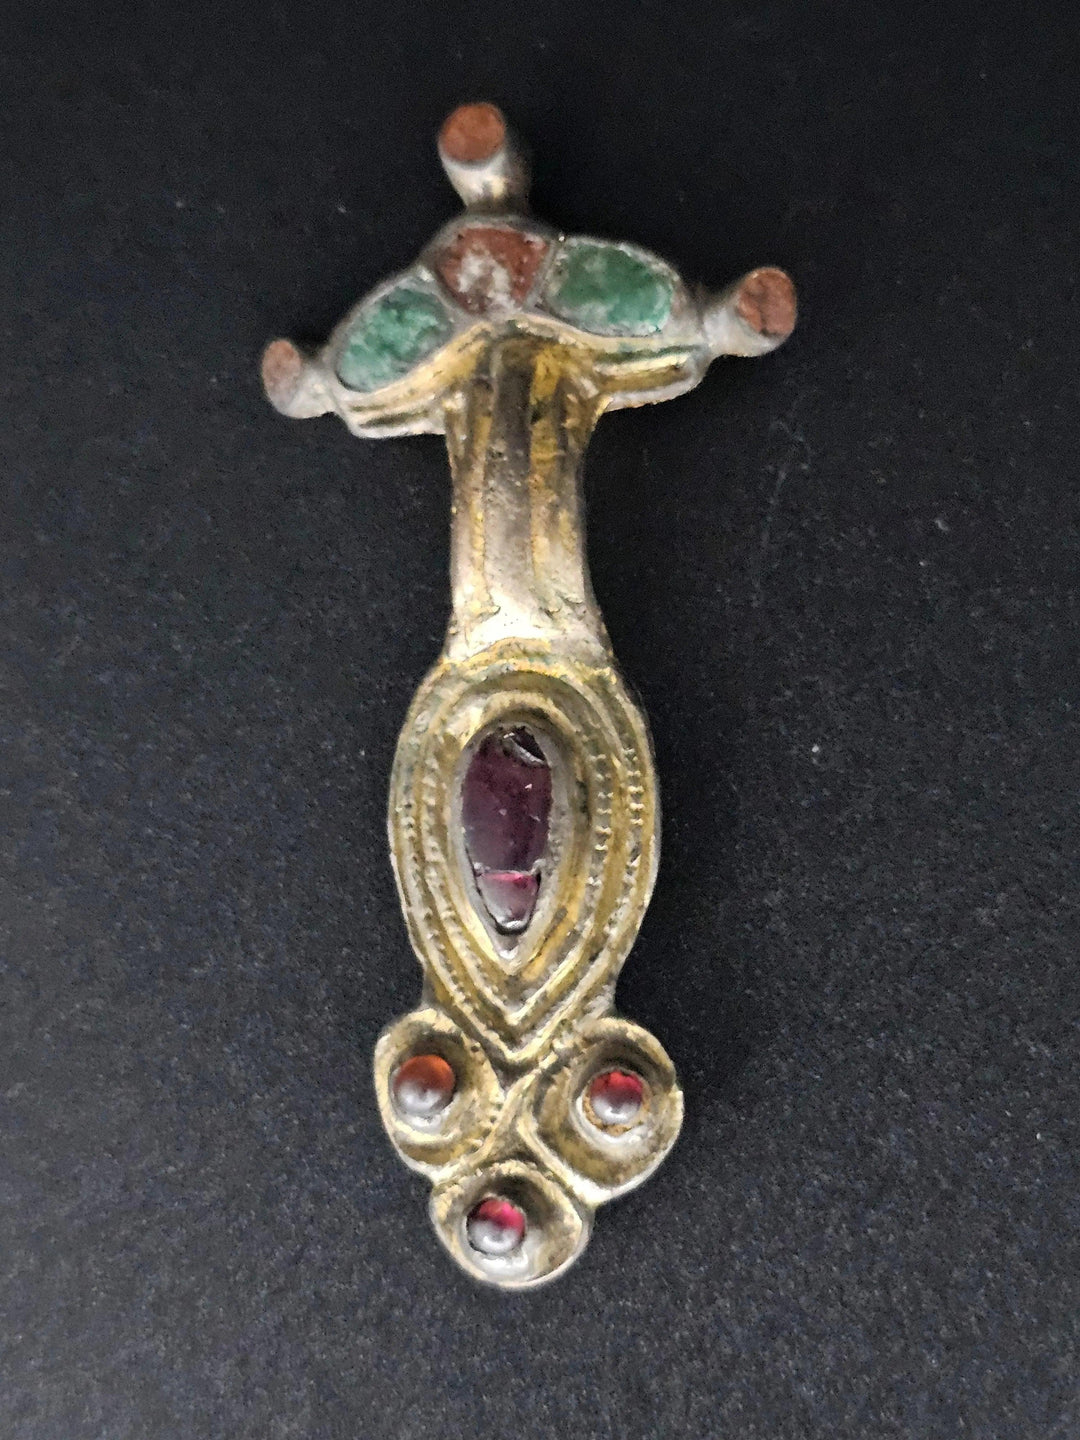 Merovingian Gilded Silver Bow Brooch with Garnet - 7th to 8th Century CE | Rare Medieval Cross Form